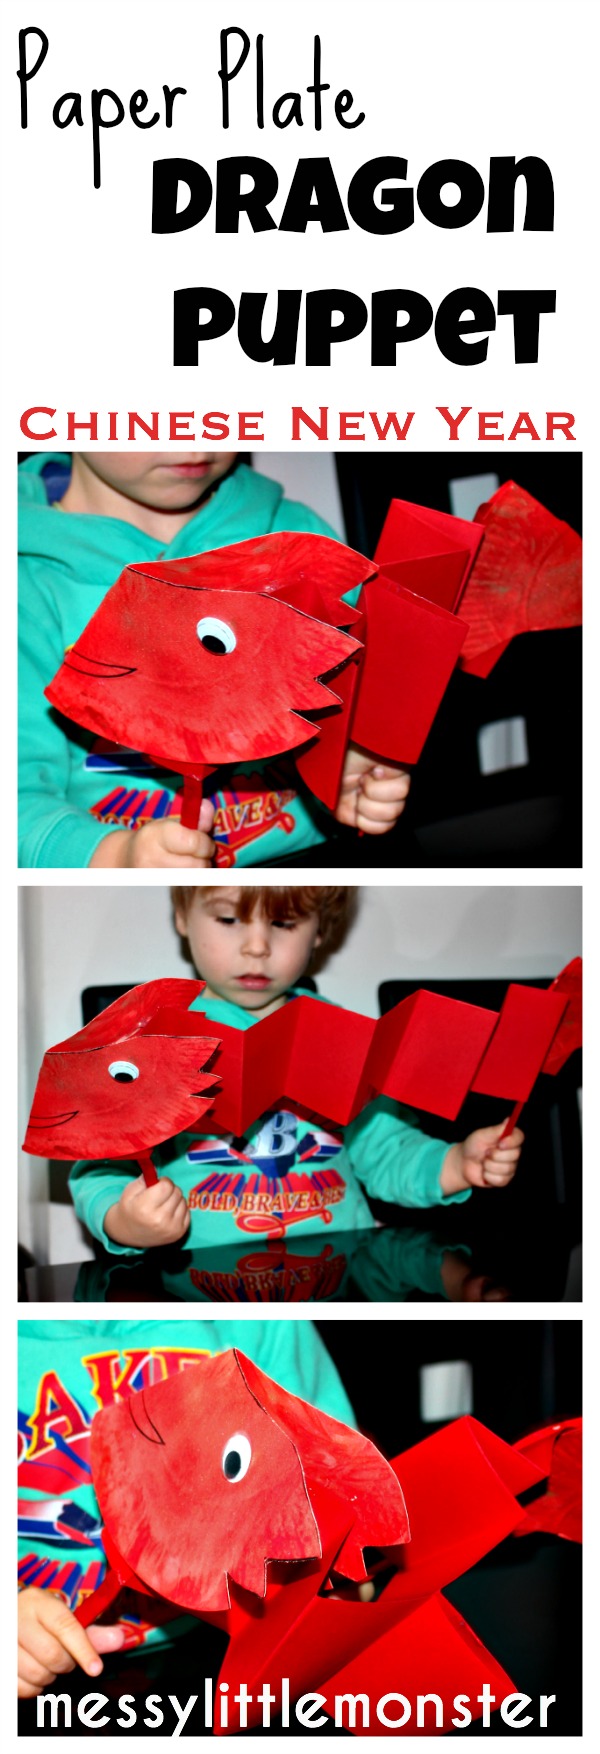 Paper plate dragon puppet.  A simple Chinese new year craft for kids, toddlers, preschoolers, eyfs.